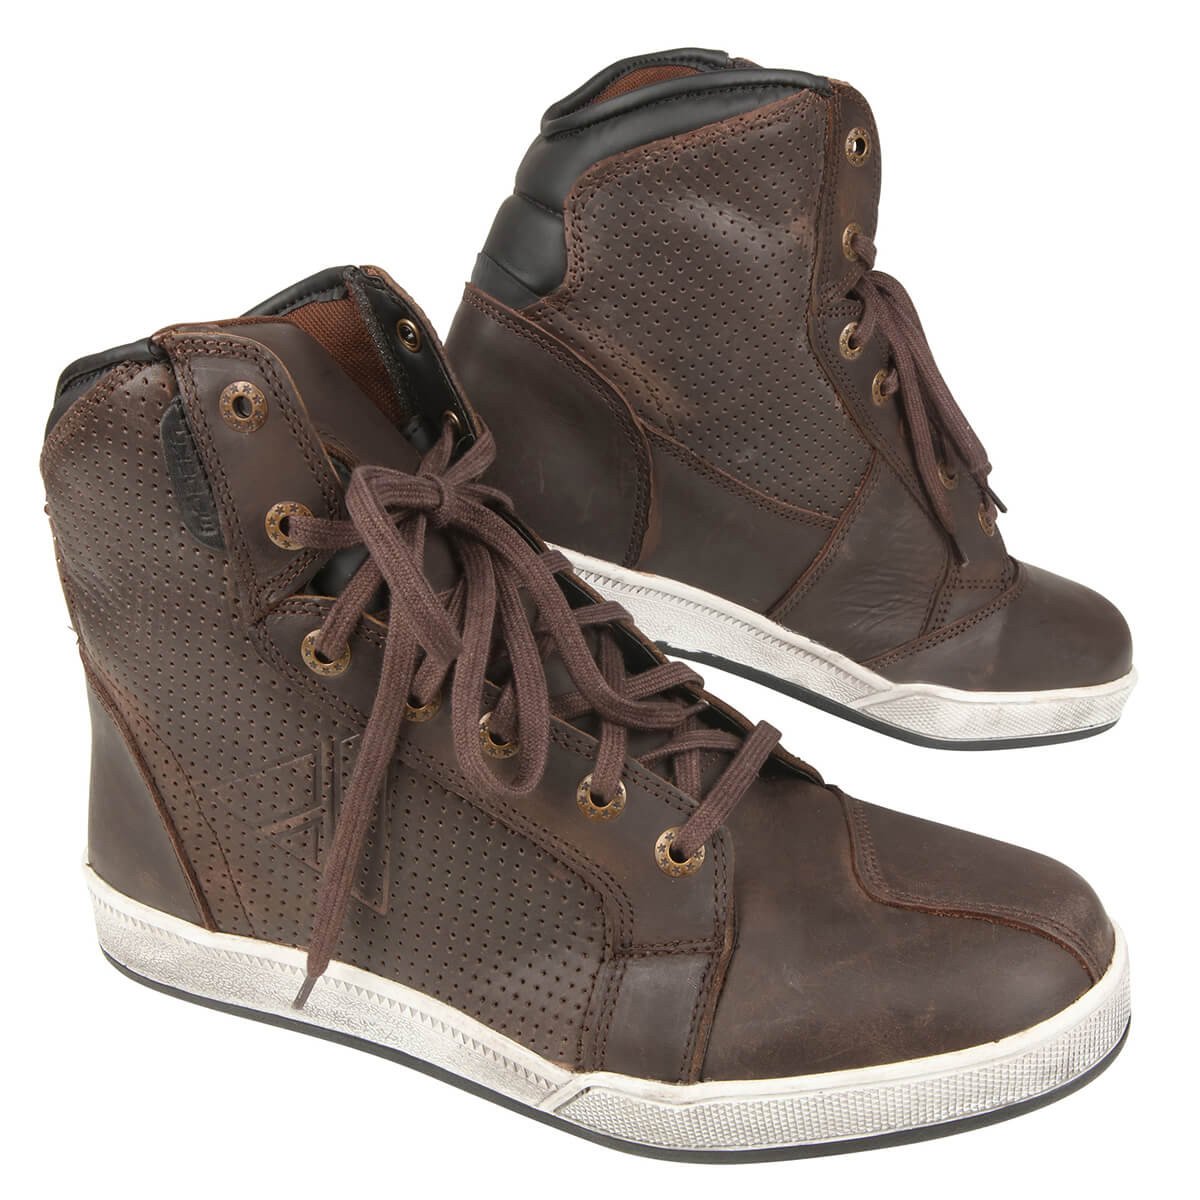 Image of Modeka Midtown Sneakers Brown Size 41 ID 4045765137949